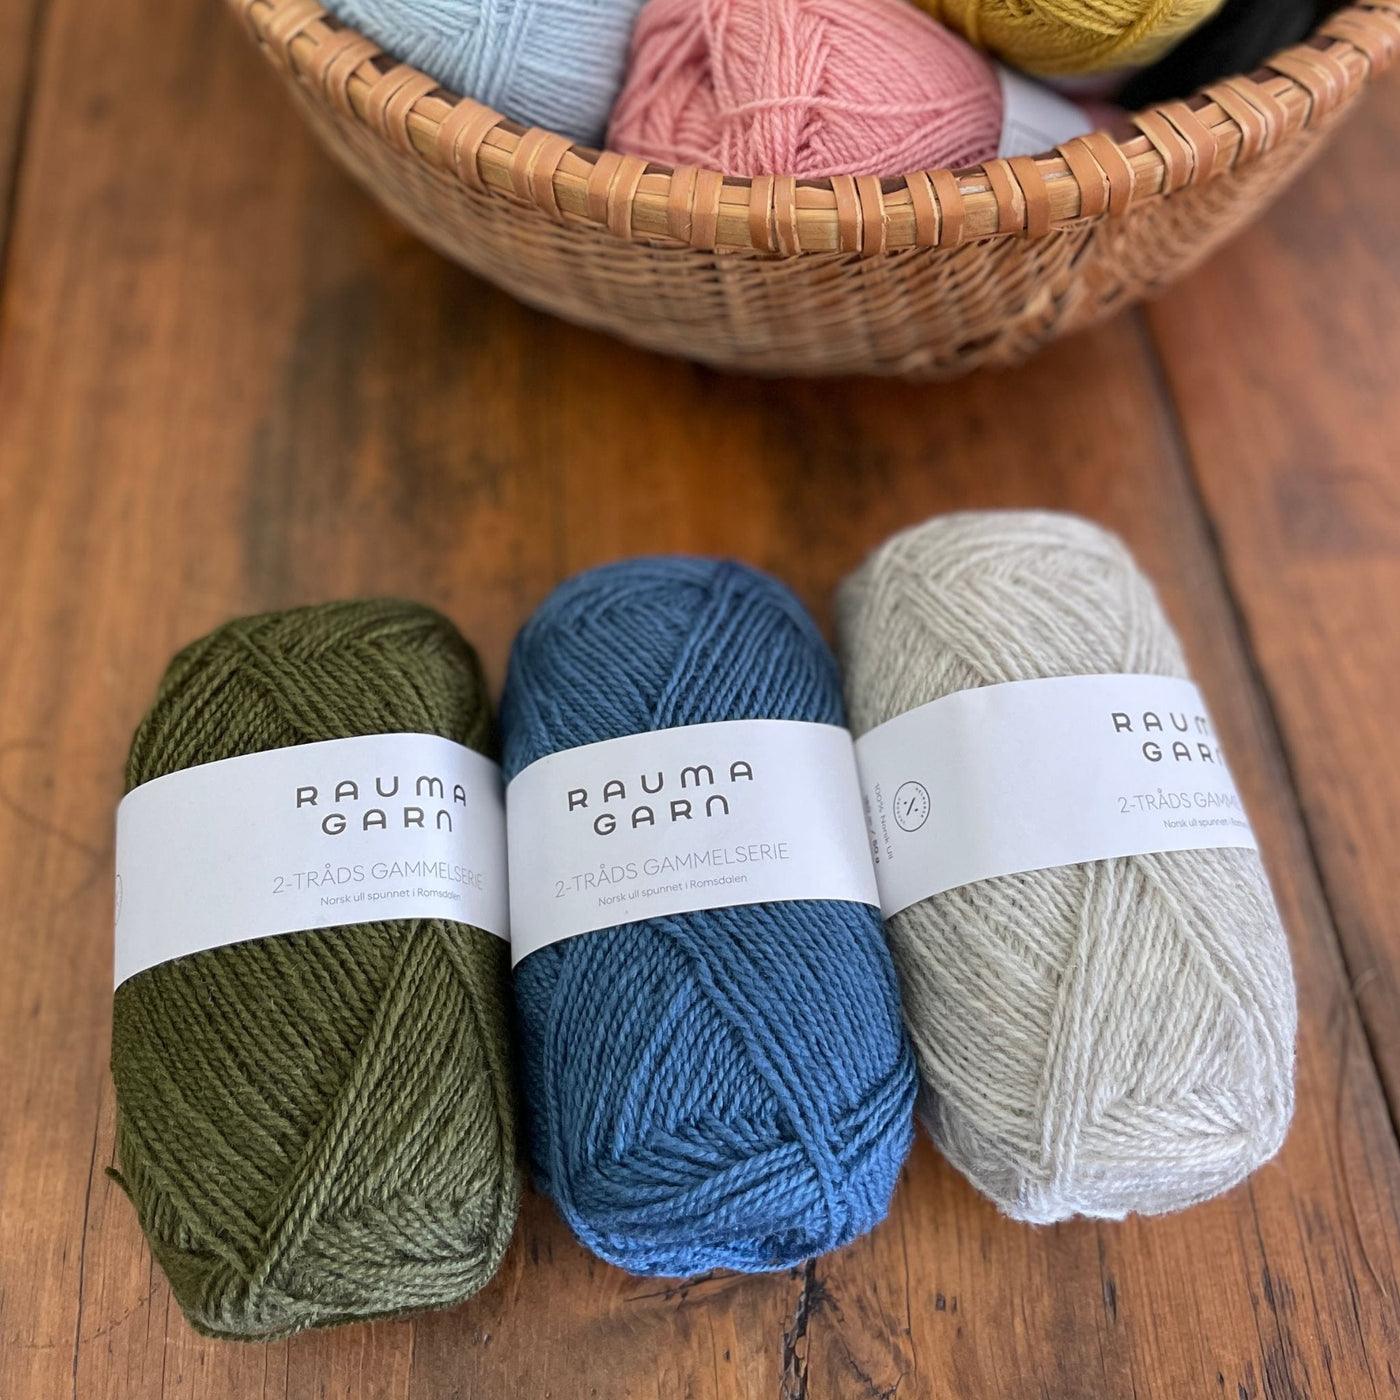 Three skeins of Rauma Gammelserie in green 476, blue 438, and light grey 403, on a wooden table near a basket